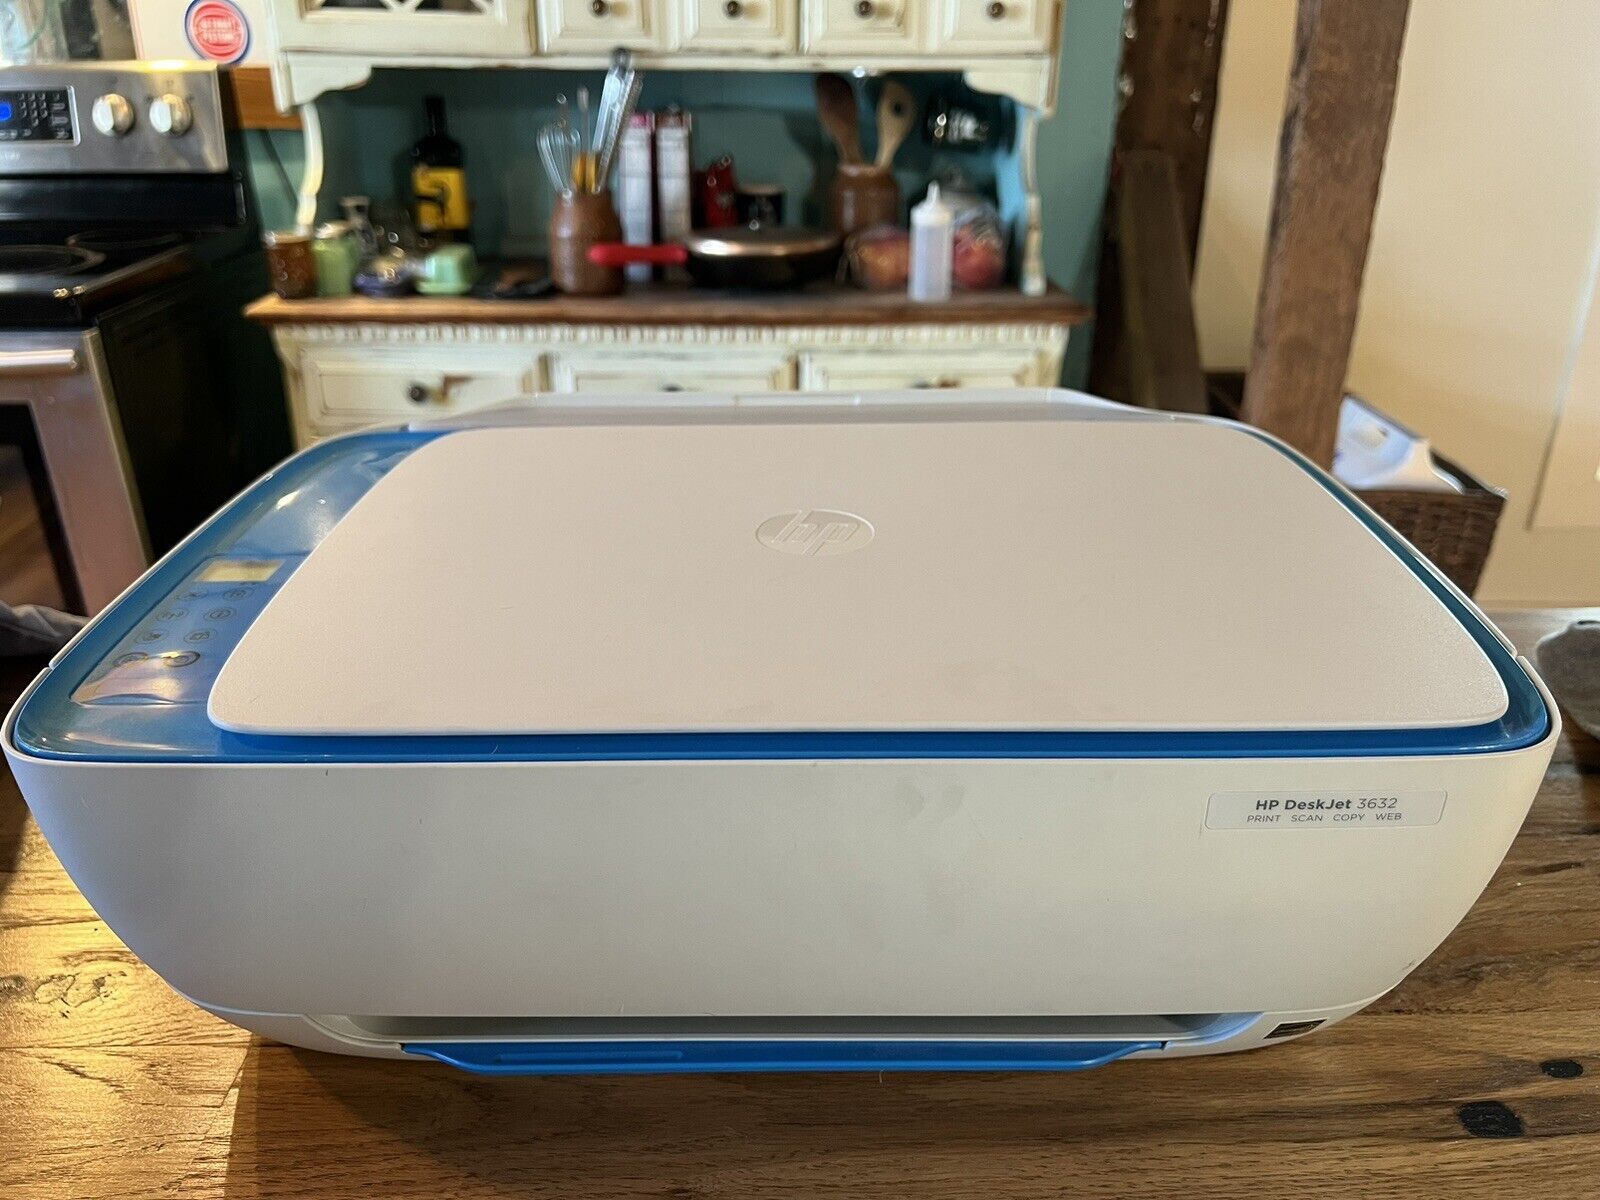 Wireless Printing: Connecting HP Deskjet 3632 To IPhone 10